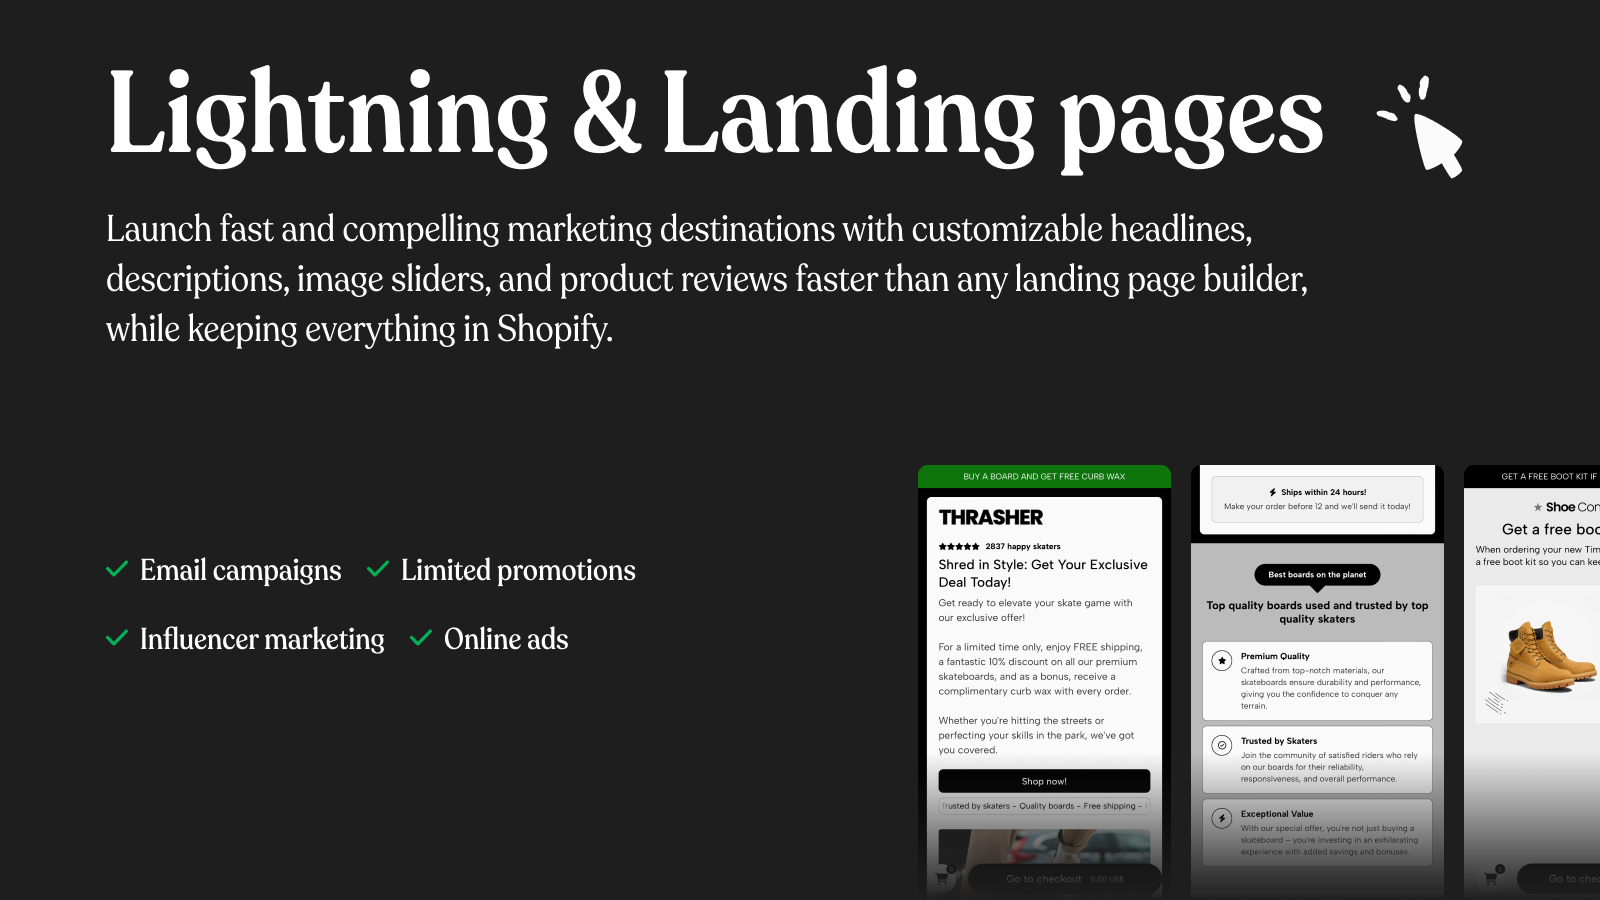 Lightning and landing pages links